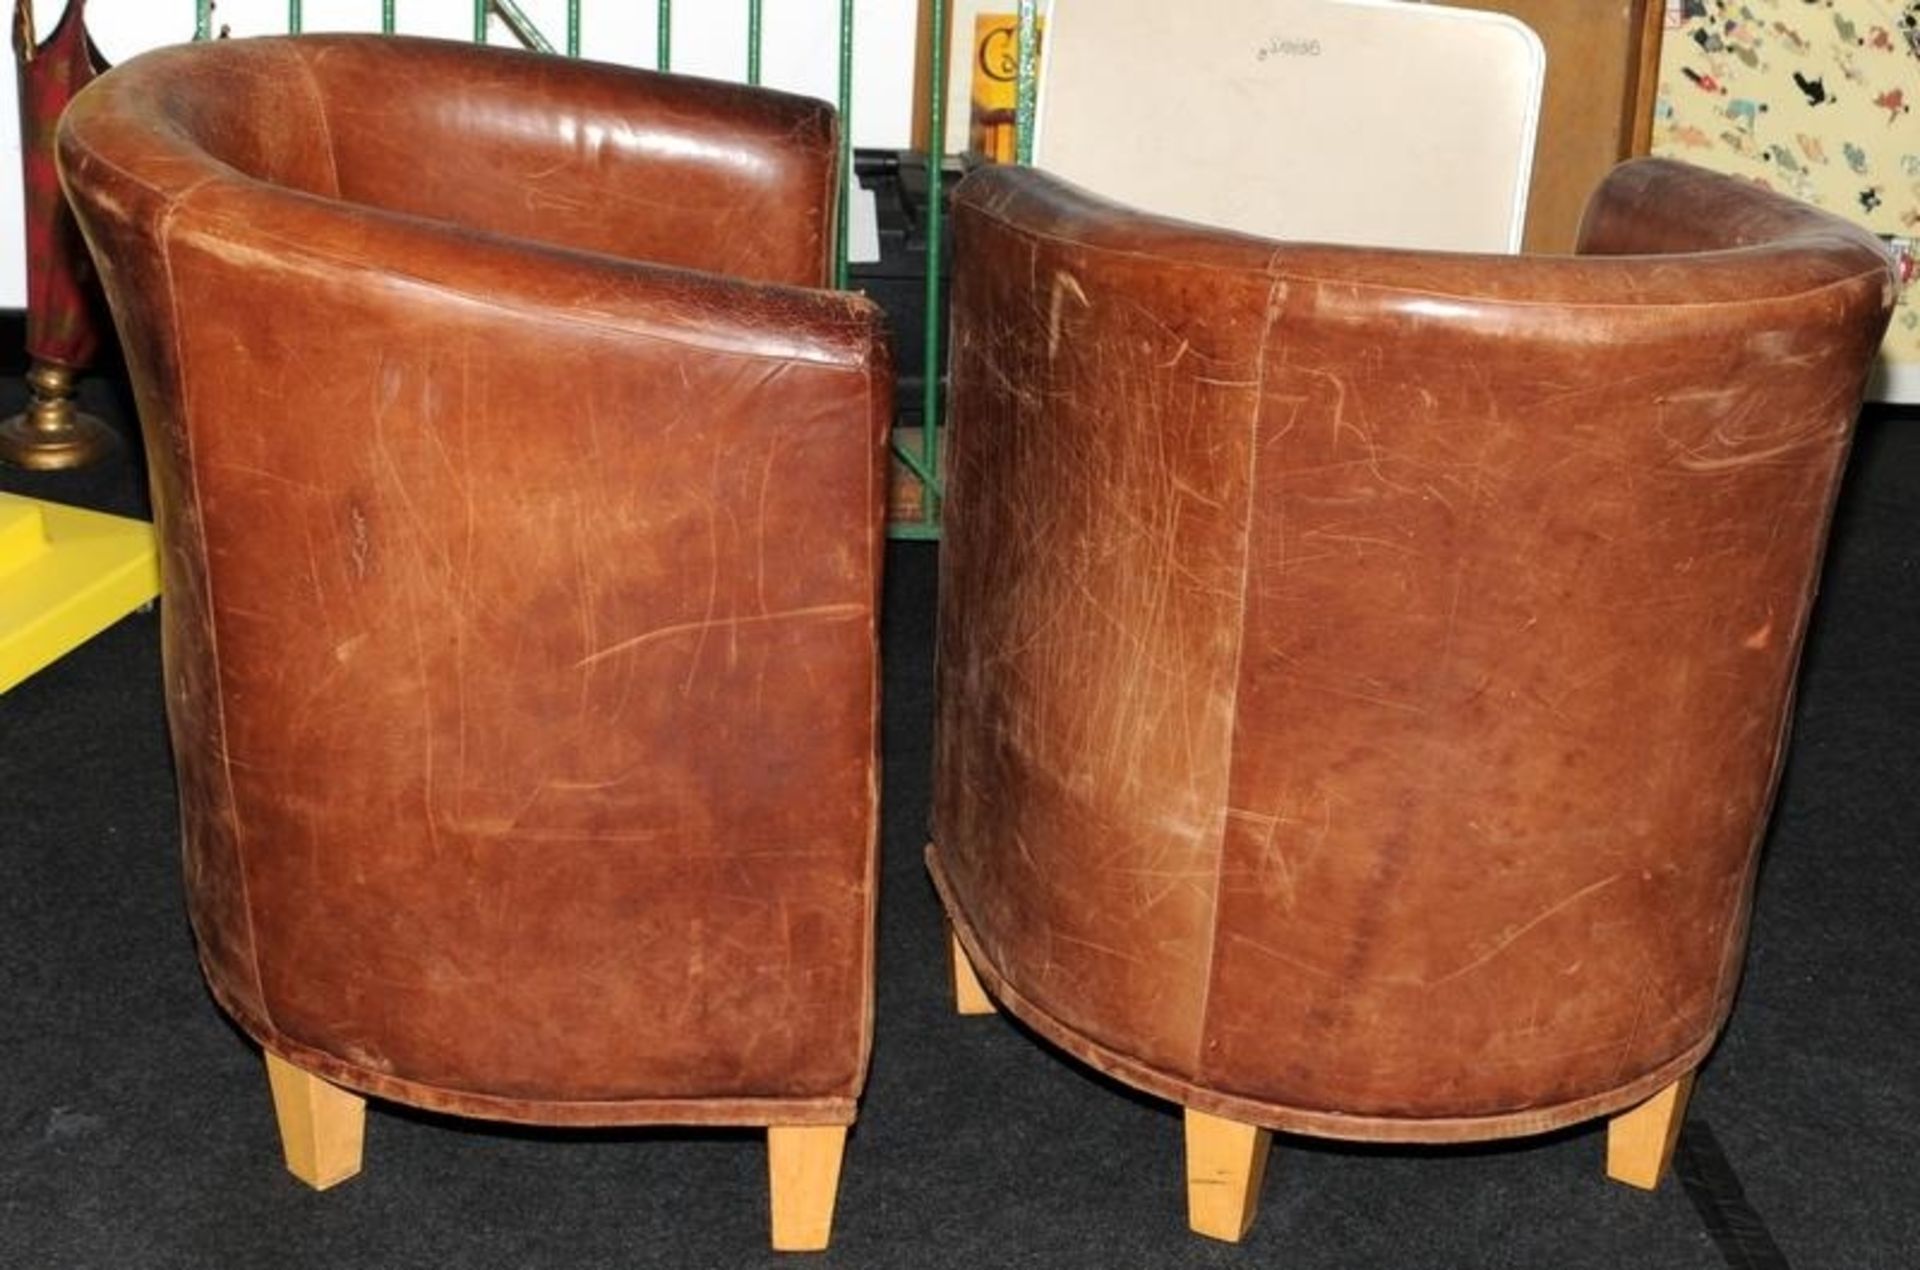 Pair of Vintage leather Tub Chairs - Image 3 of 3